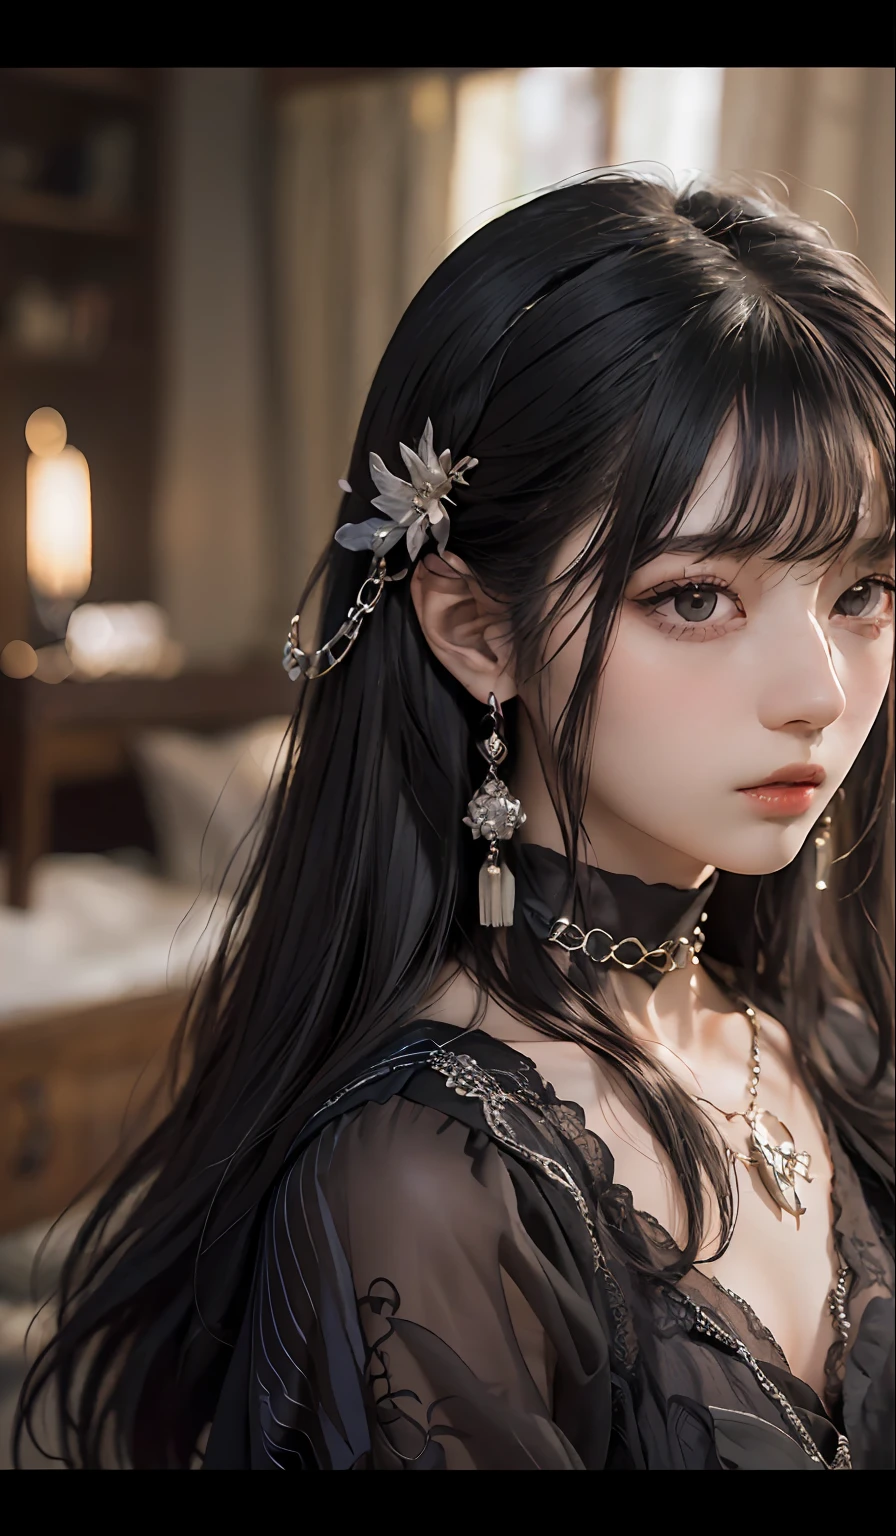 ((top-quality、​masterpiece:1.3))、sharp:1.2、Perfect Body Beauty:1.1)、Highly detailed facial and skin texture、Detailed eye、fancy、(Pure black dress:1.3)、(chains:1.3)、double eyelid、((Longhaire:1.5))、(dark brown  hair)、(well-groomed bangs:1.2)、((One Woman))、fantasy castle、tying  hair、Black Princess、darkened room、Darkness Falls、The Princess Who Turned Evil、Fallen into evil、Evil Princess、a necklace、Luxurious ornaments、